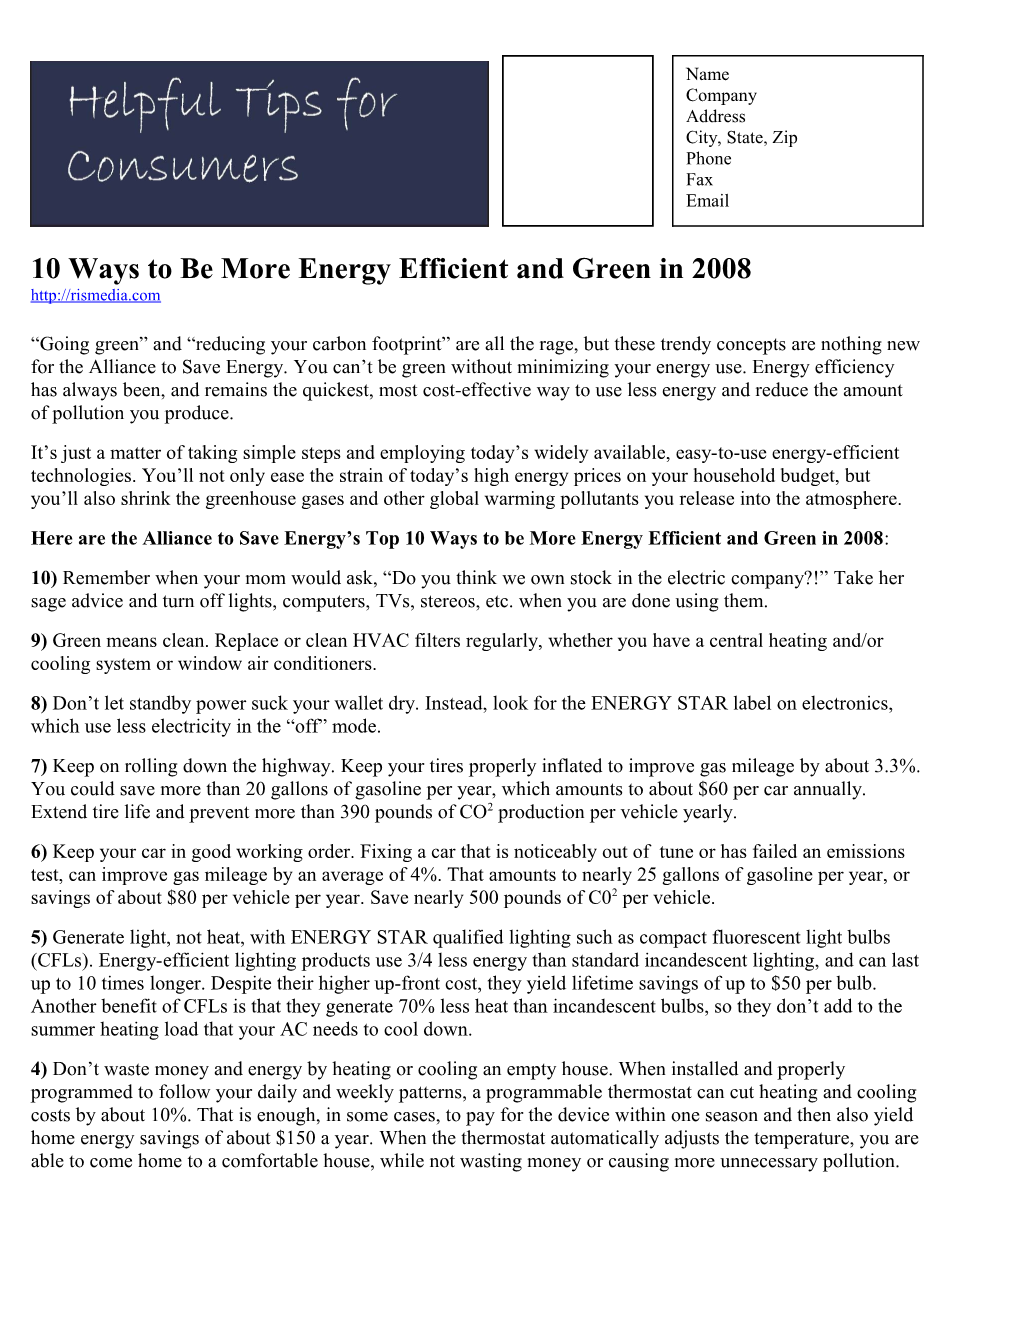 10 Ways to Be More Energy Efficient and Green in 2008